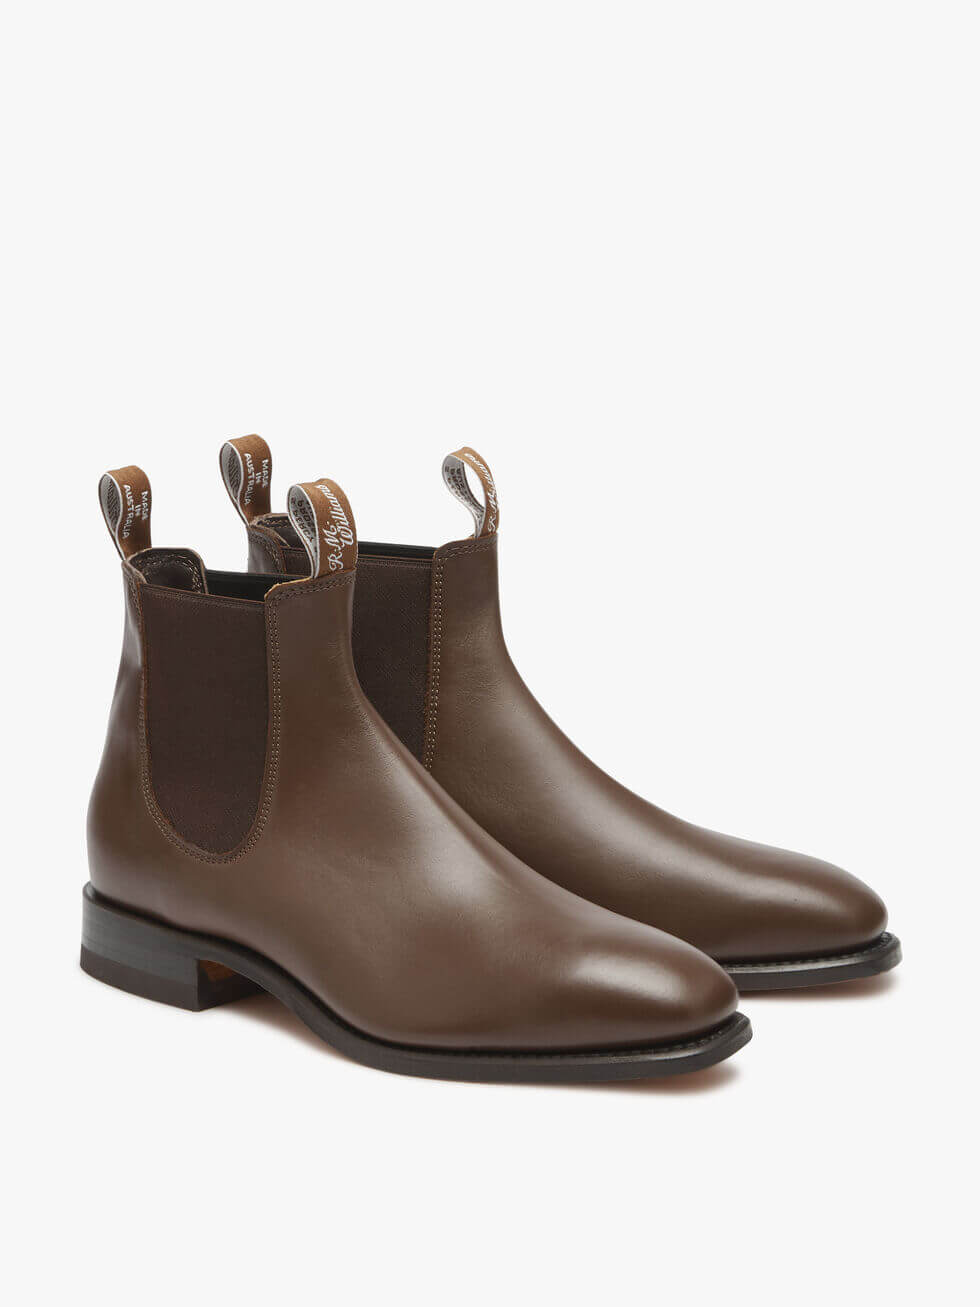 R.M. Williams Dark Tan Craftsman Boot Yearling Leather | Davids Of Haslemere